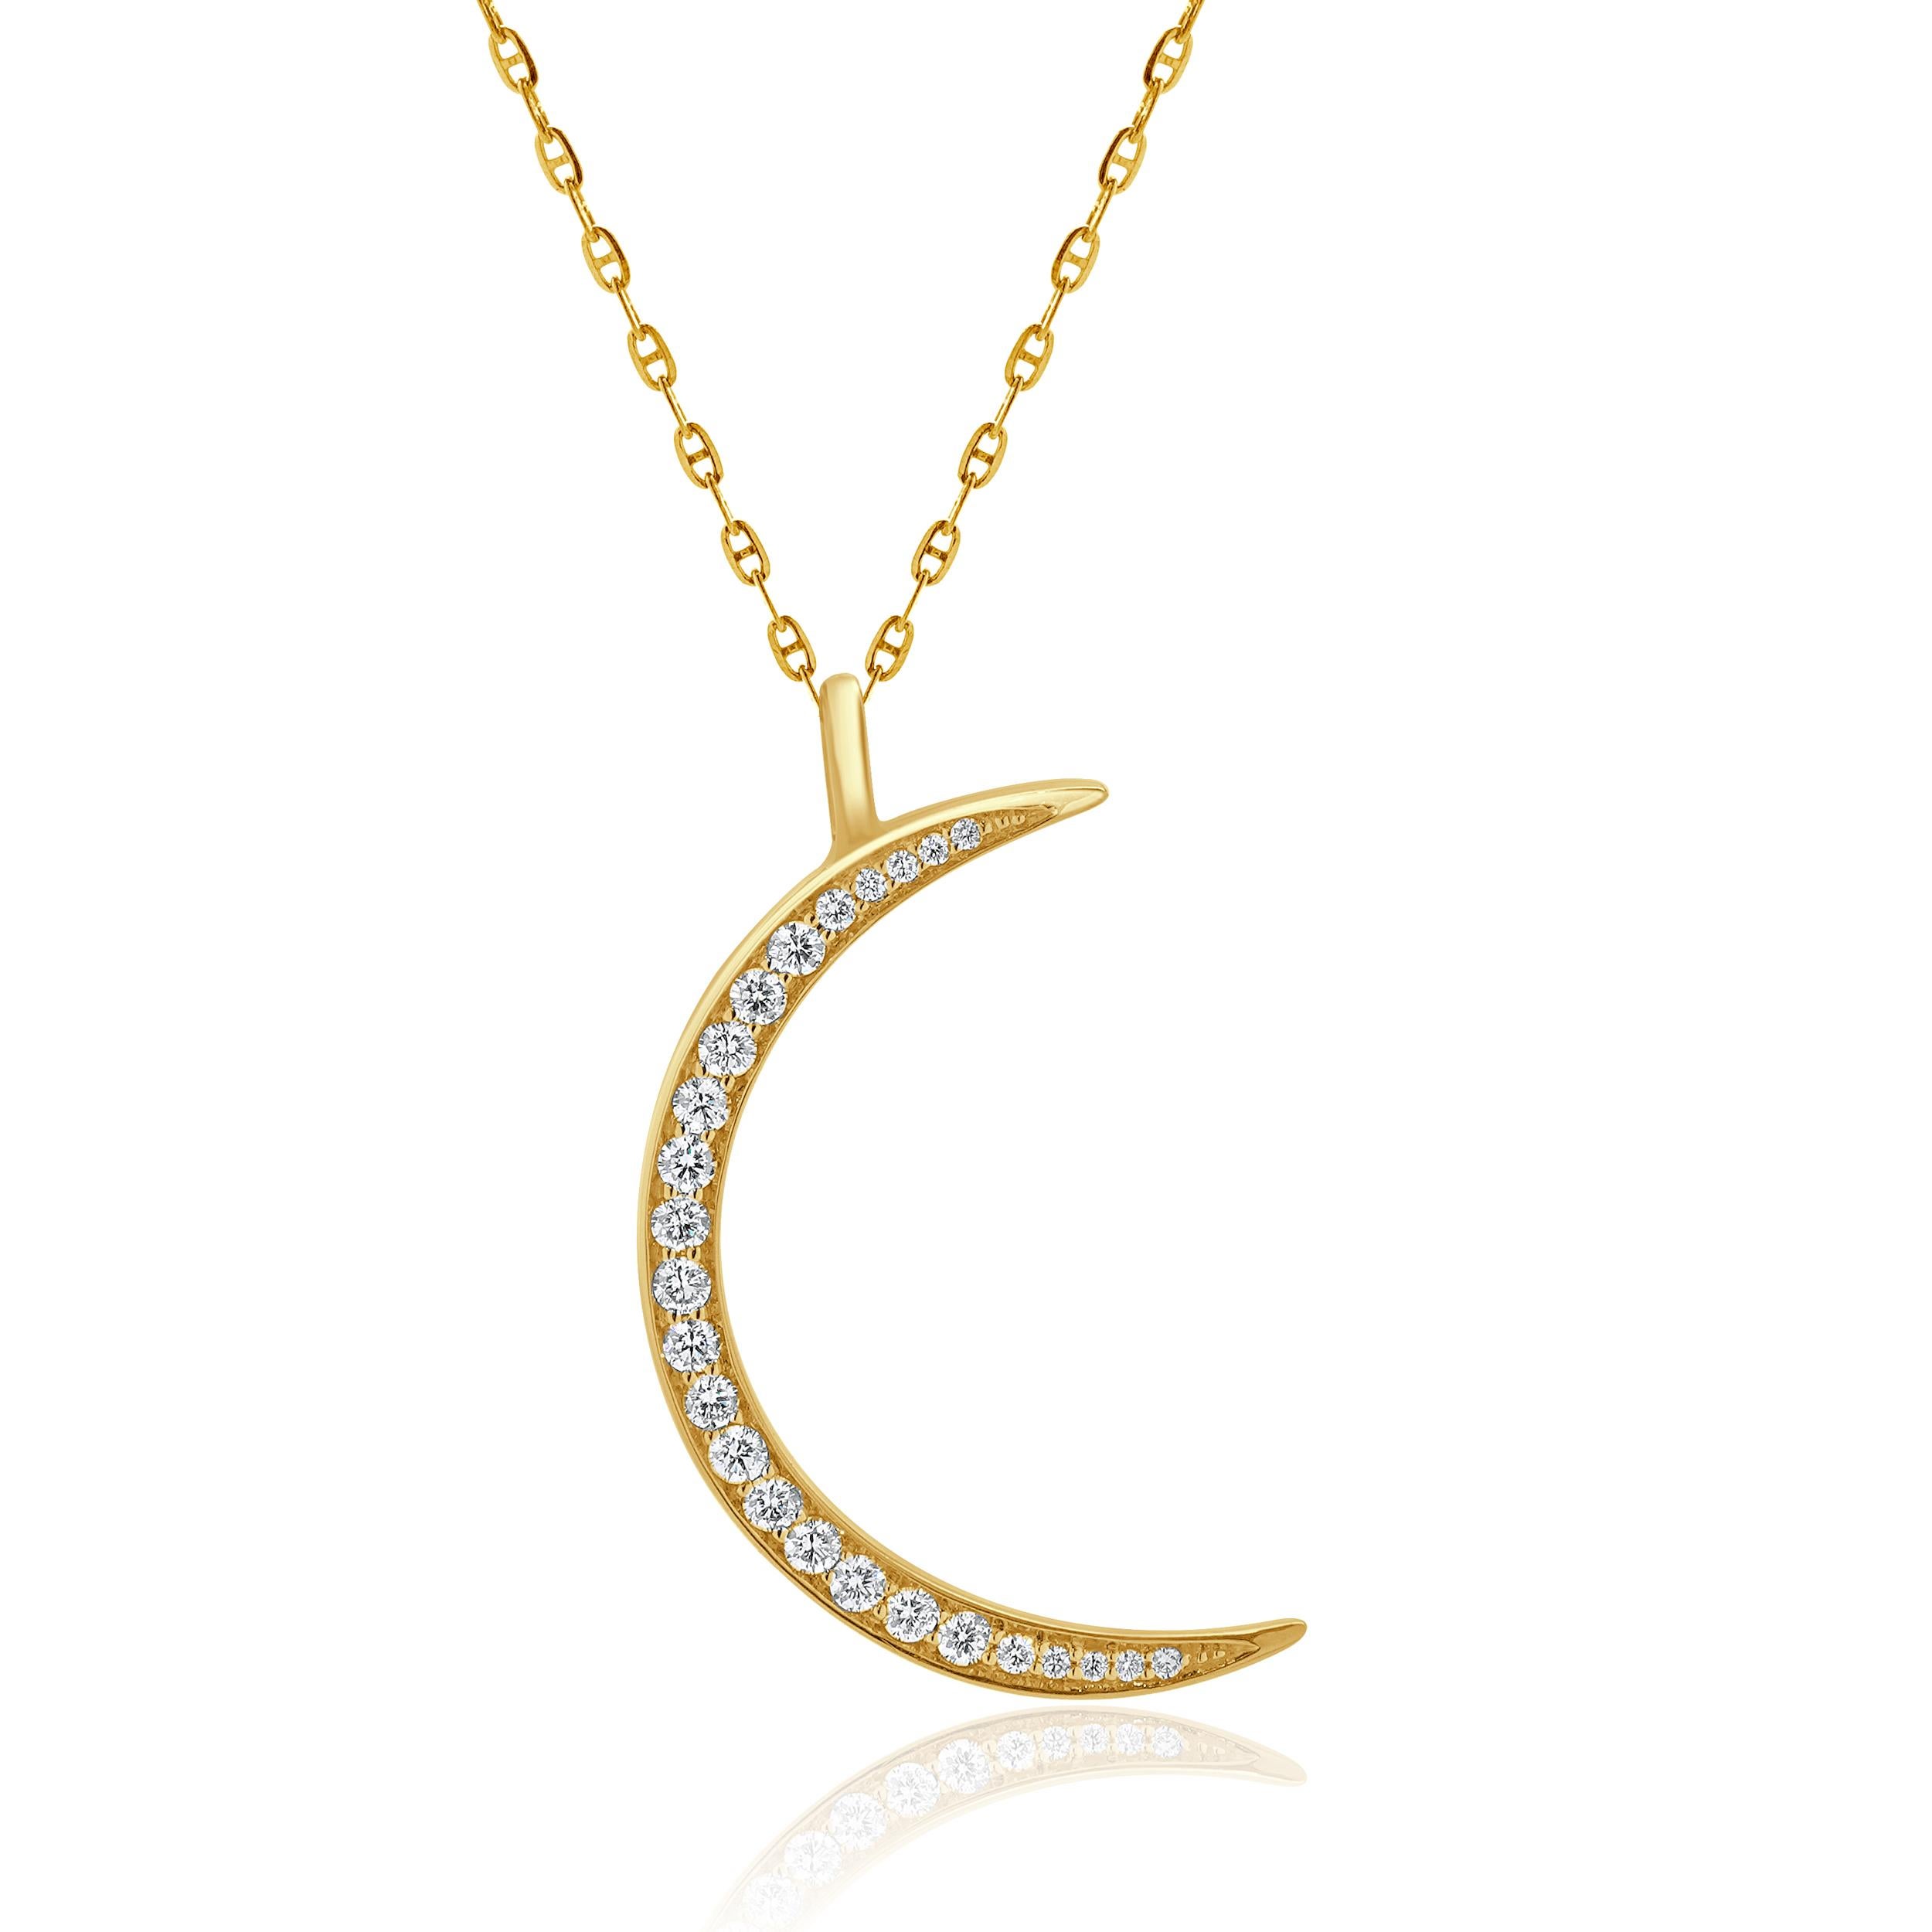 Designer: custom
Material:14K yellow gold
Diamonds: 25 round brilliant cut = 0.33cttw
Color: G 
Clarity: SI1
Dimensions: necklace measures 18-inches in length 
Weight: 3.25 grams
